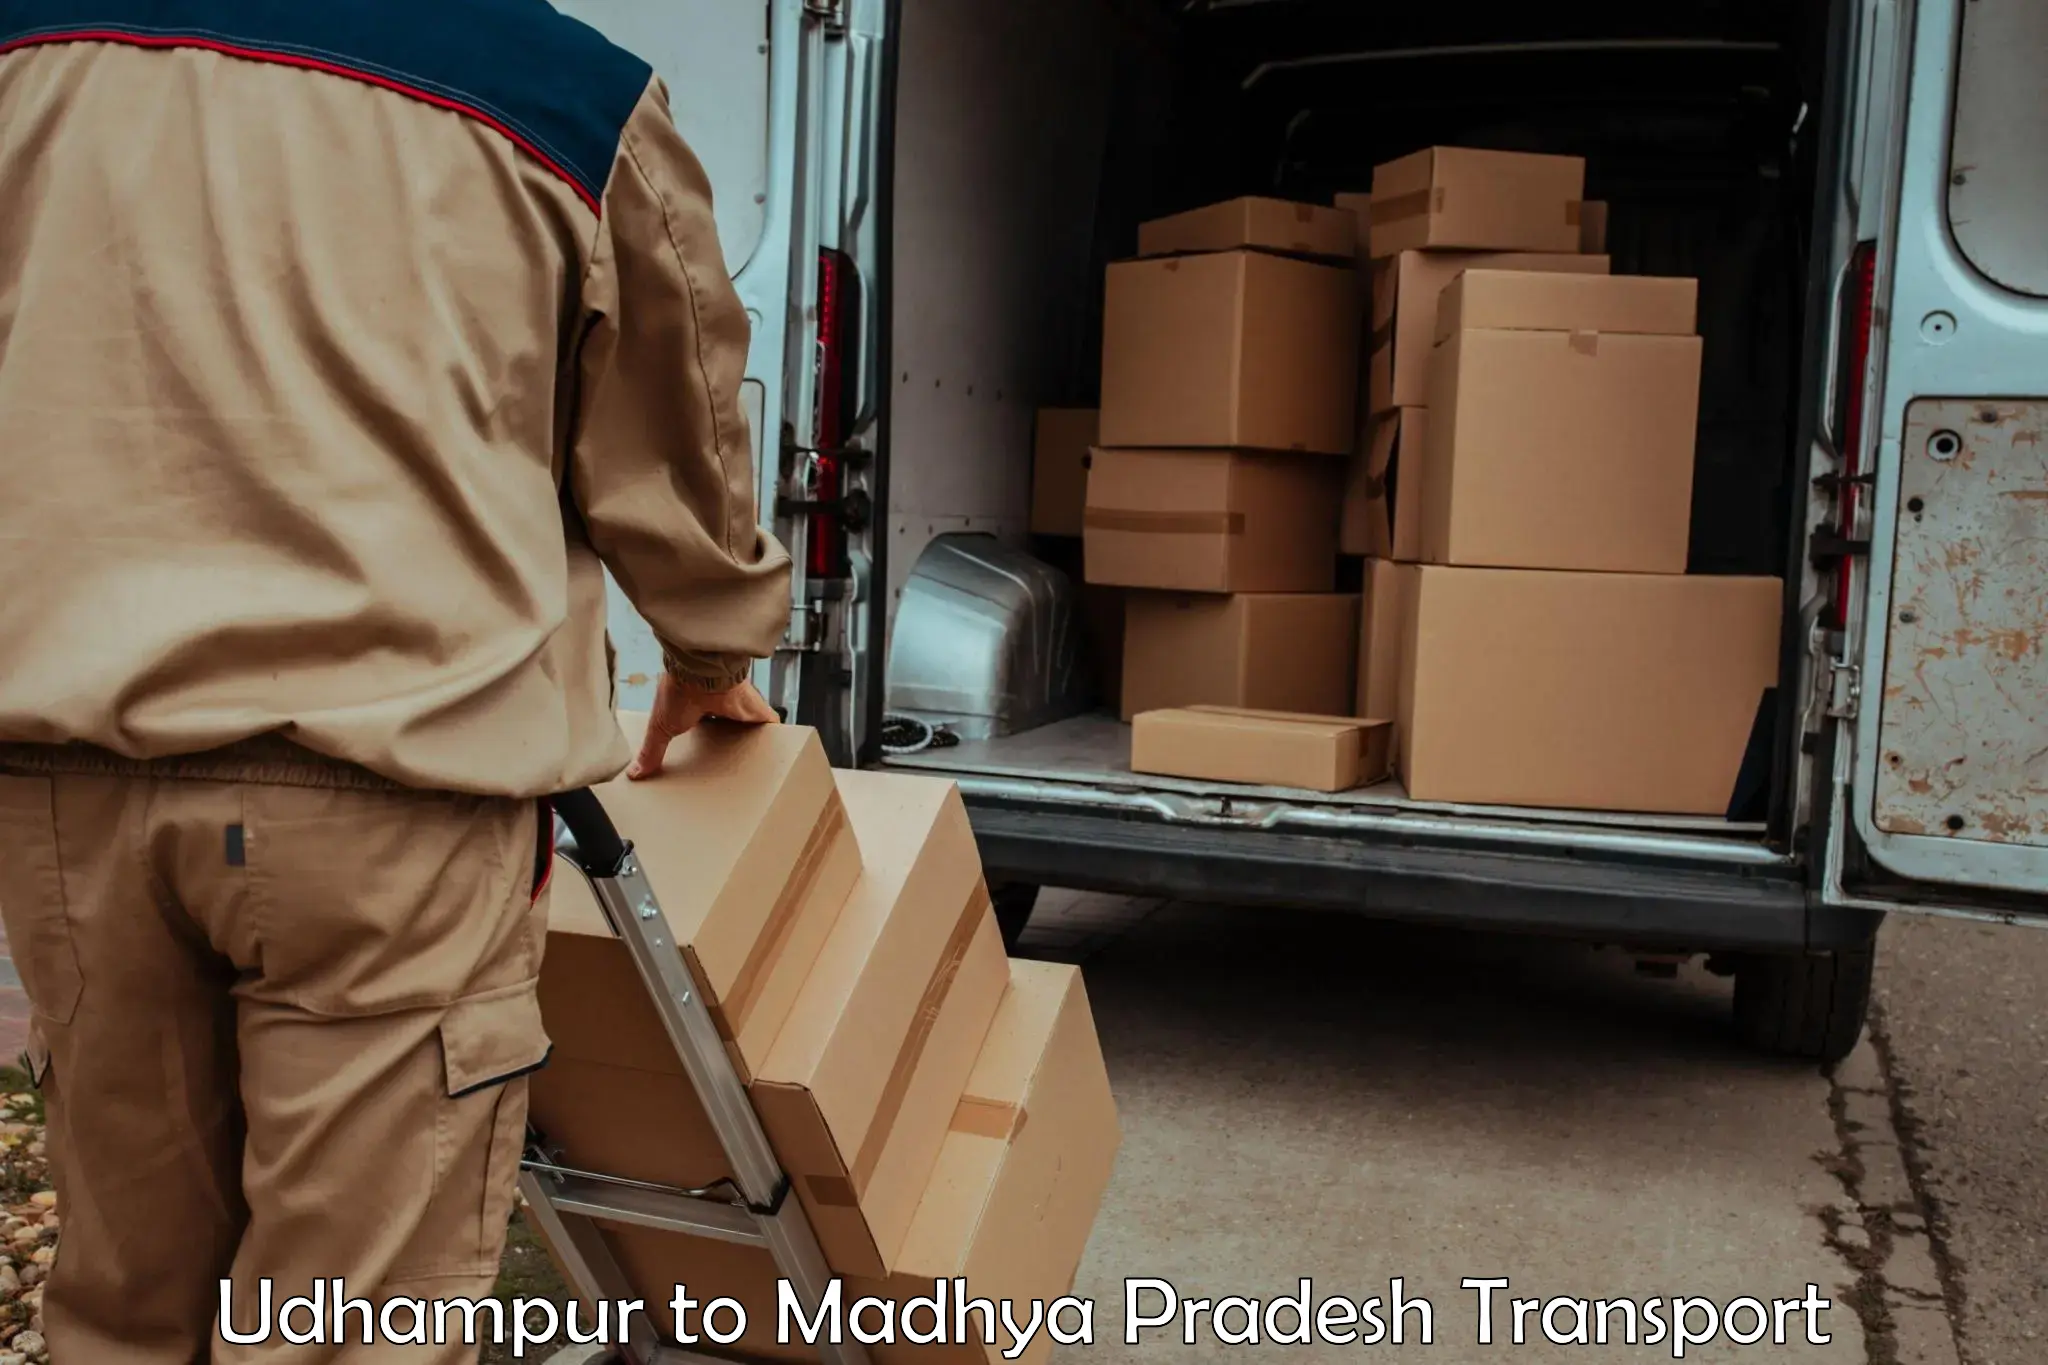 Part load transport service in India Udhampur to Indore